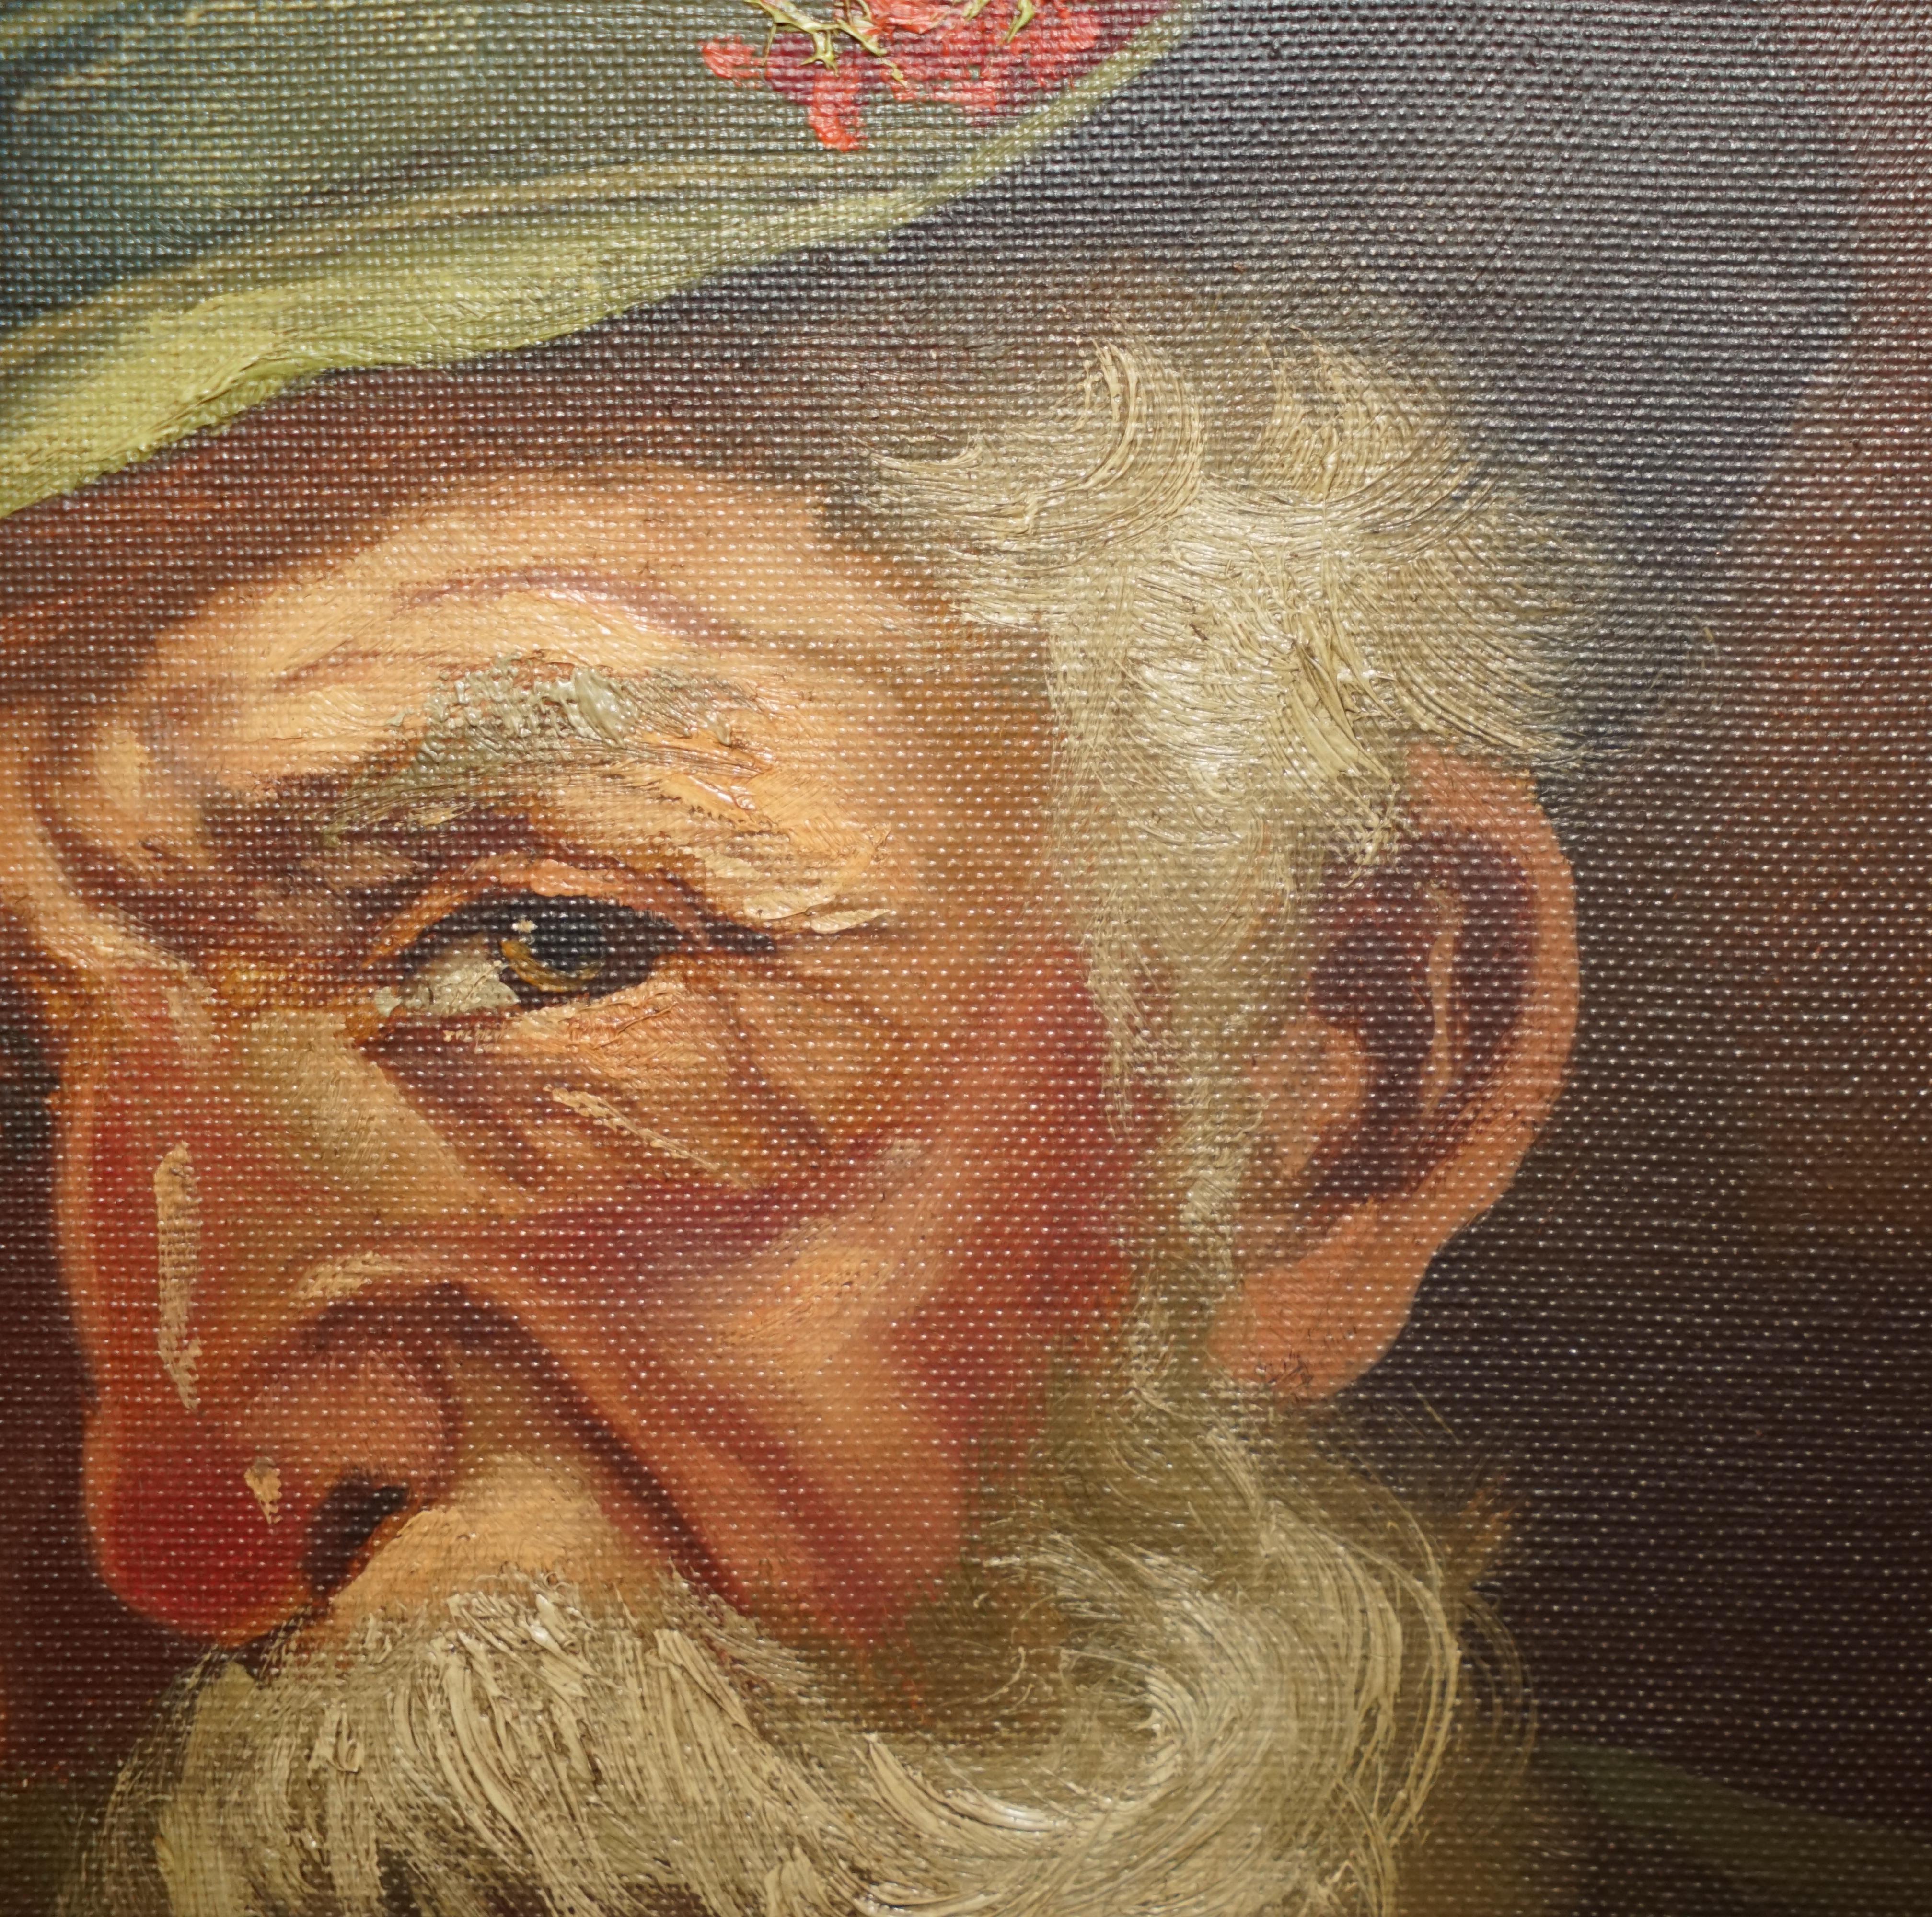 Antique Signed Dutch Oil on Canvas Painting of Old Man Man with Grey Hair & CAP For Sale 4